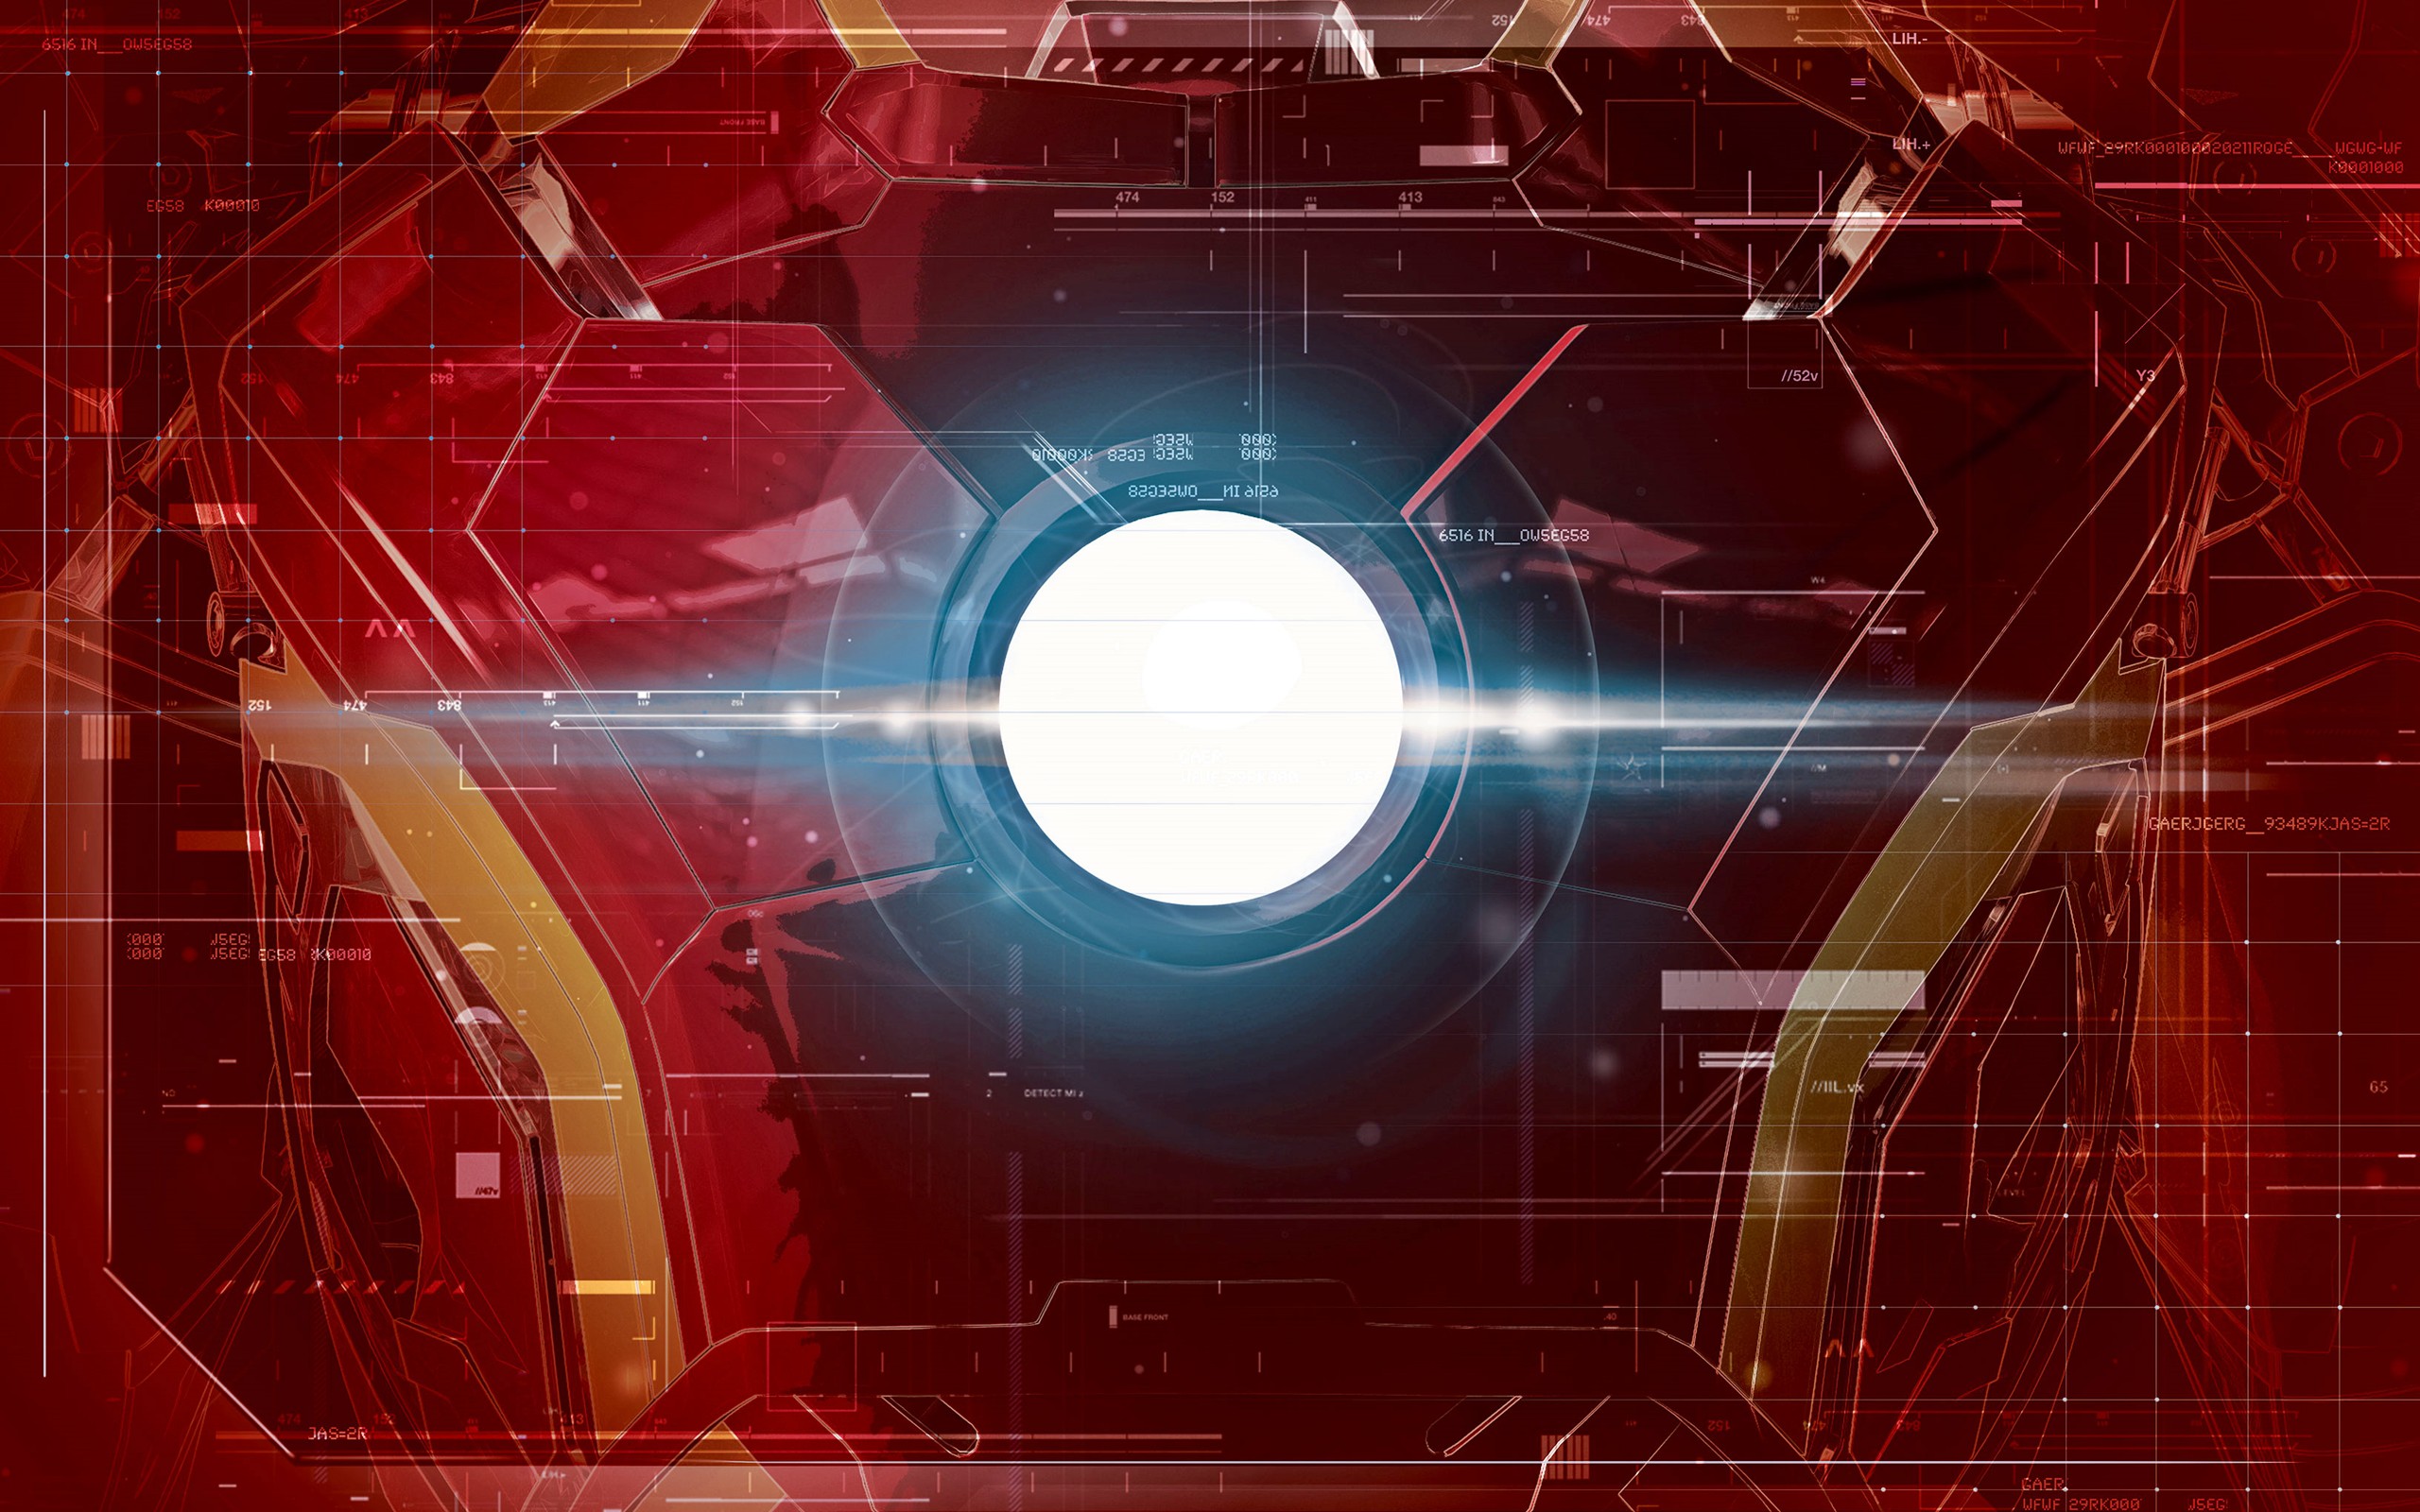 The Avengers, Avengers: Age of Ultron, Superhero, Costumes, Lines, Technology, Glowing, Iron Man, Red background, Interfaces Wallpaper